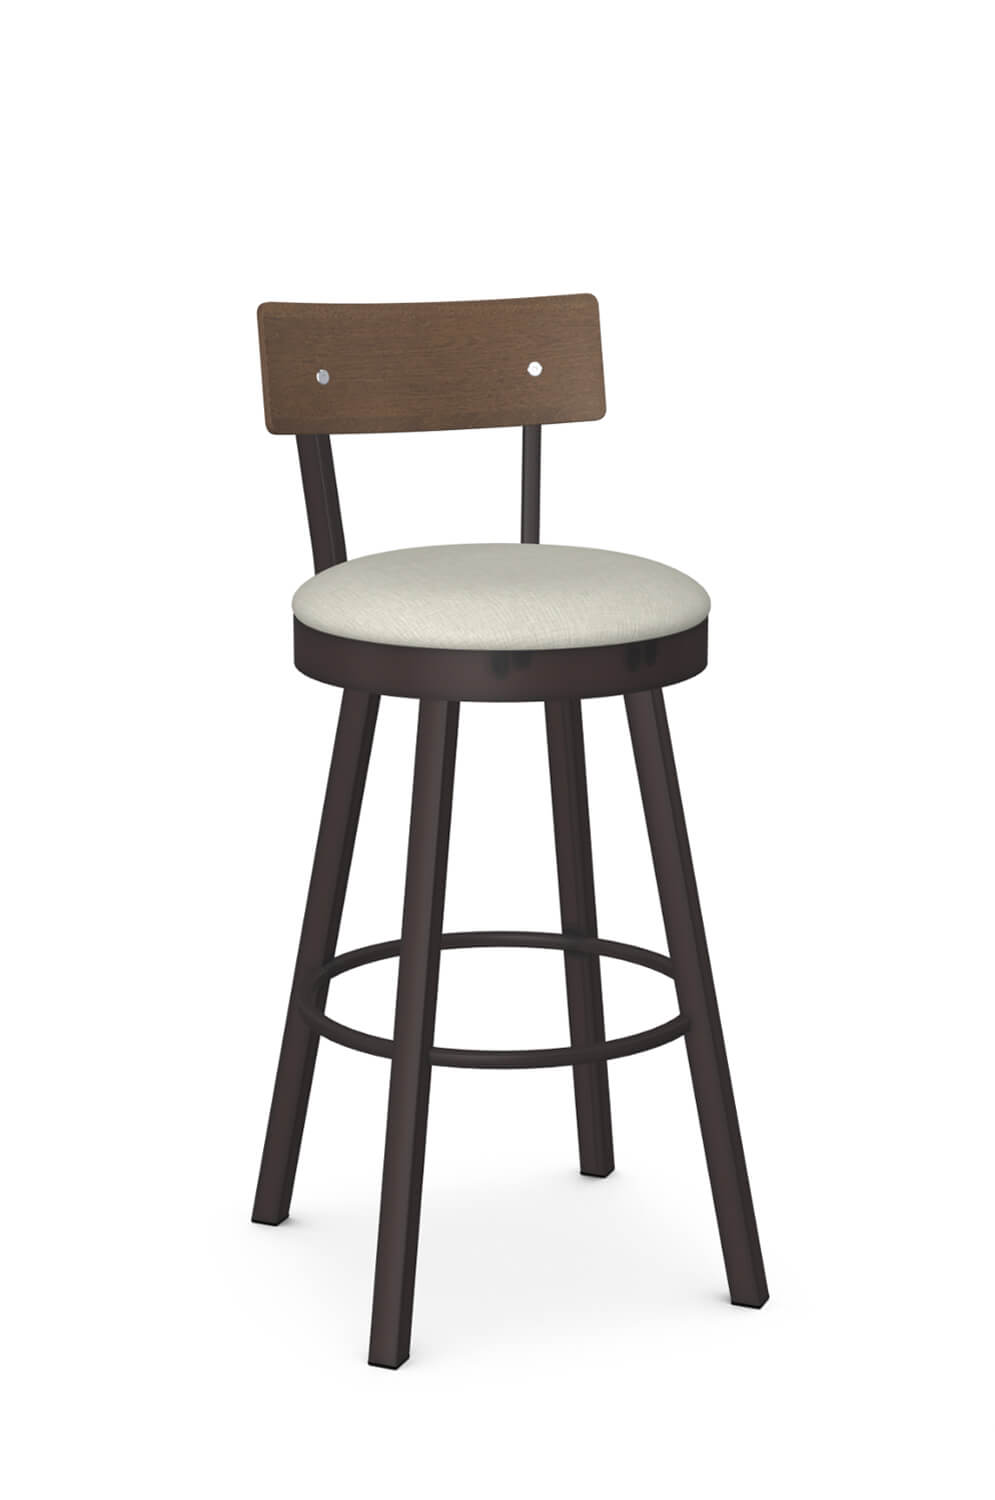 O&K Furniture 30-inch Retro Bar Stool Kitchen Chair Backless Counter Stool Saddle Seat Rustic Brown 1-PC